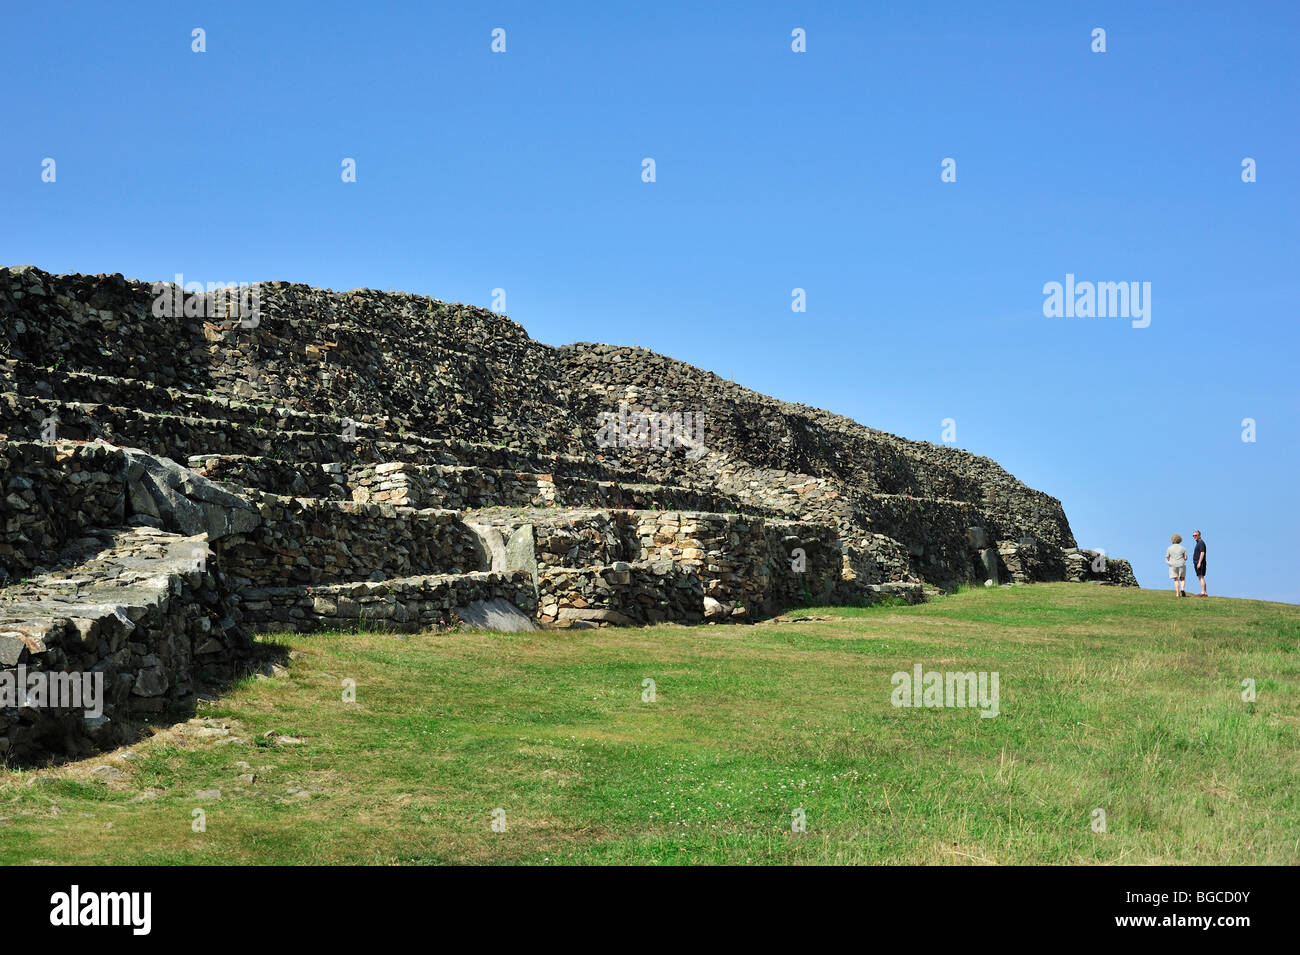 Cairn of Barnenez / Barnenez Tumulus / Mound, a Neolithic monument near Plouezoc'h, Finistère, Brittany, France Stock Photo